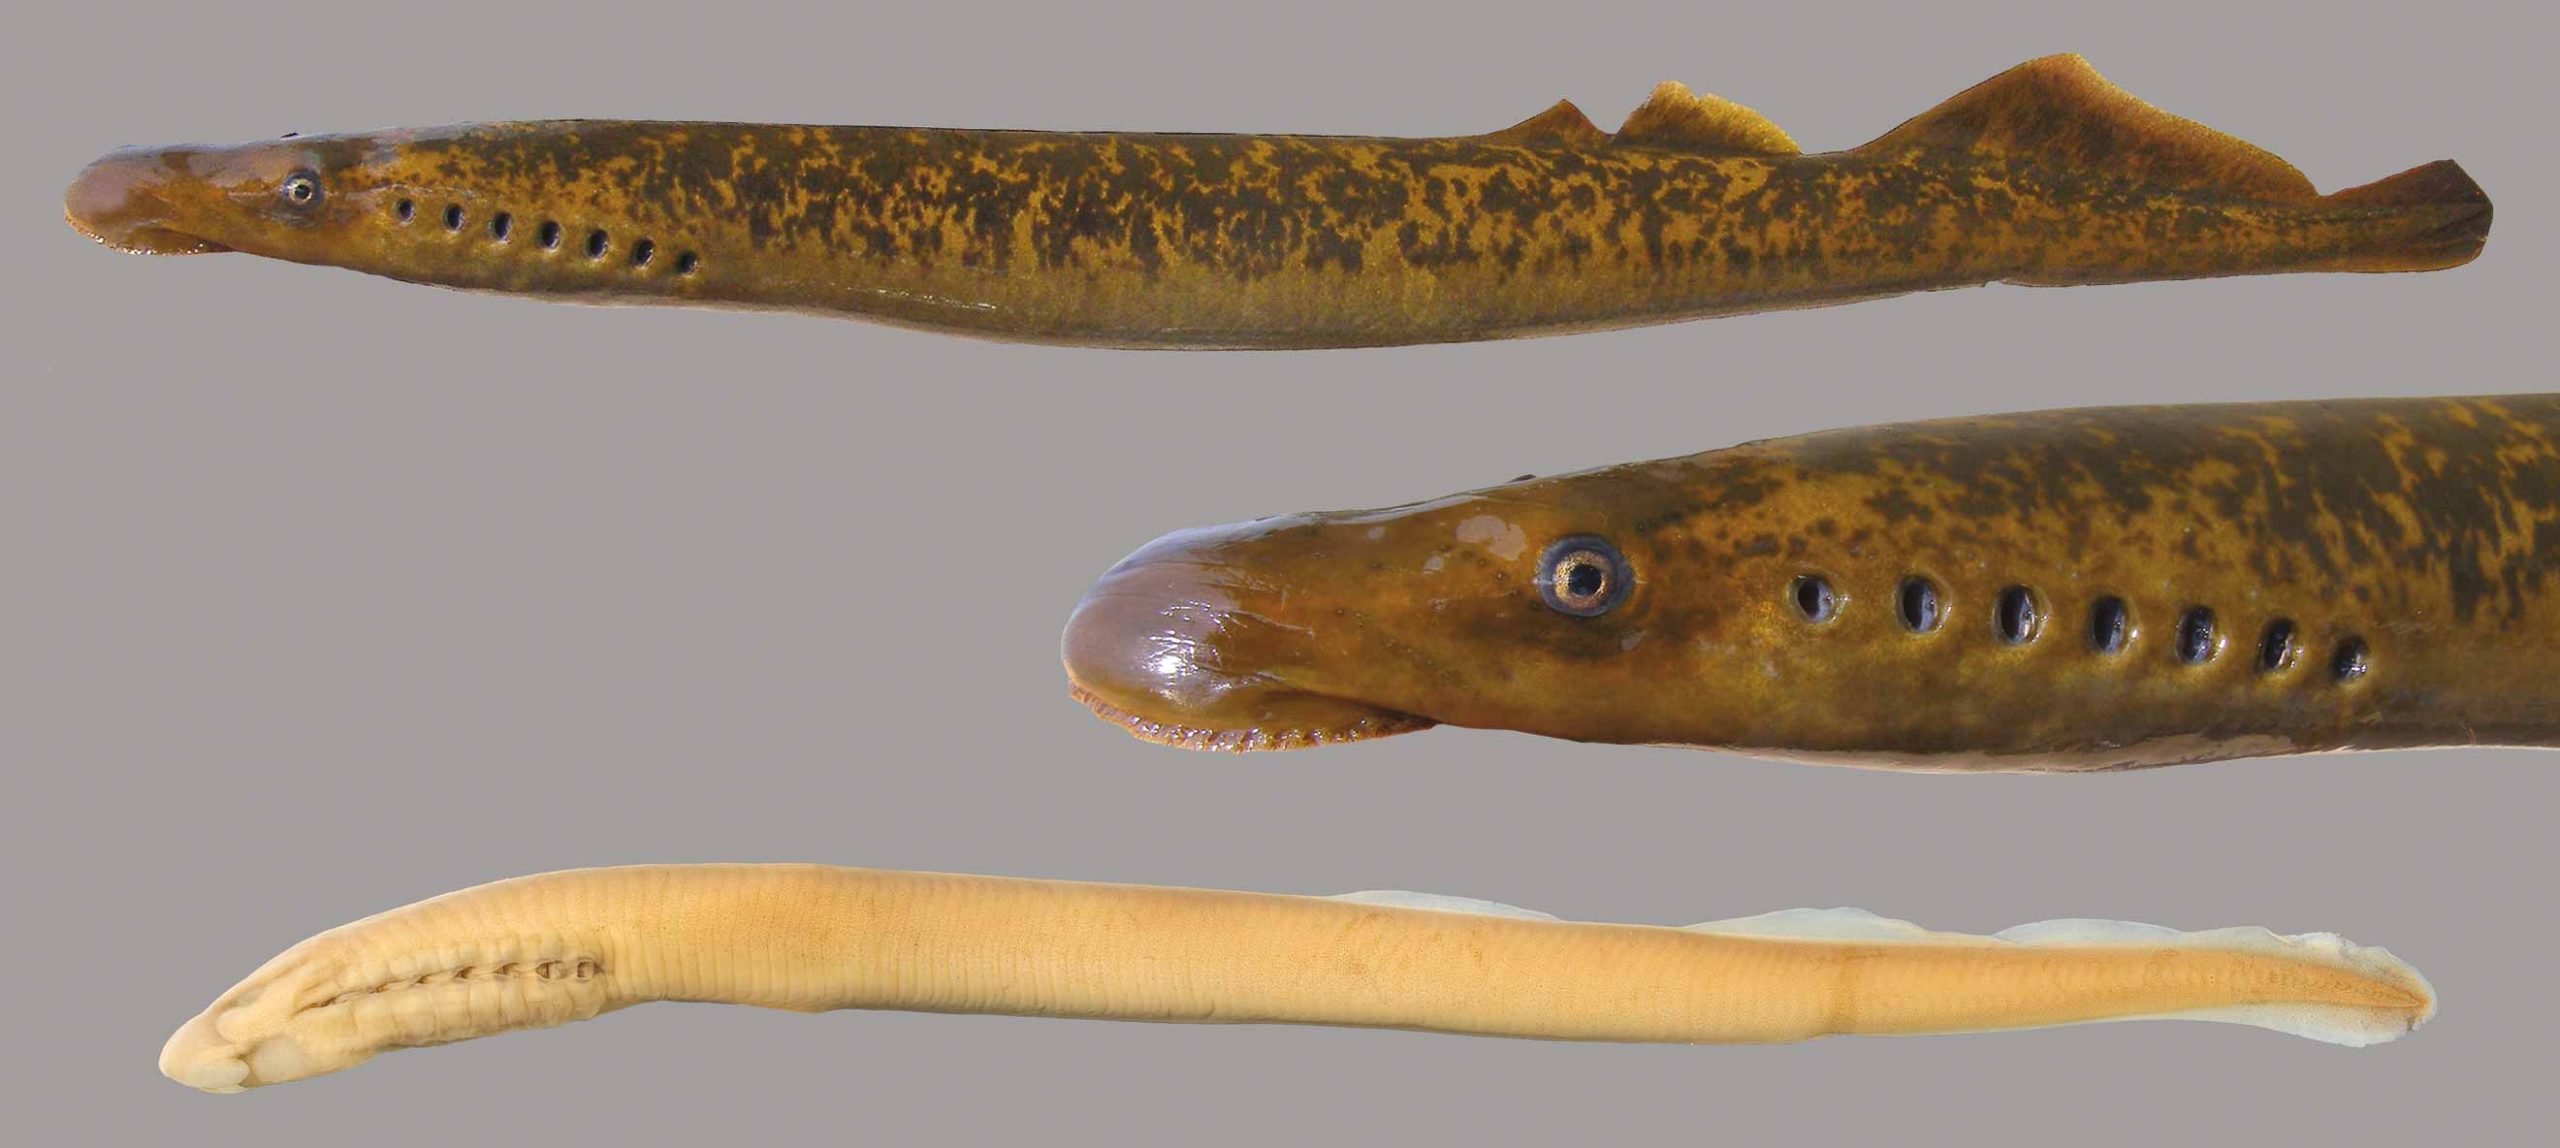 Lateral view of an adult Sea Lamprey